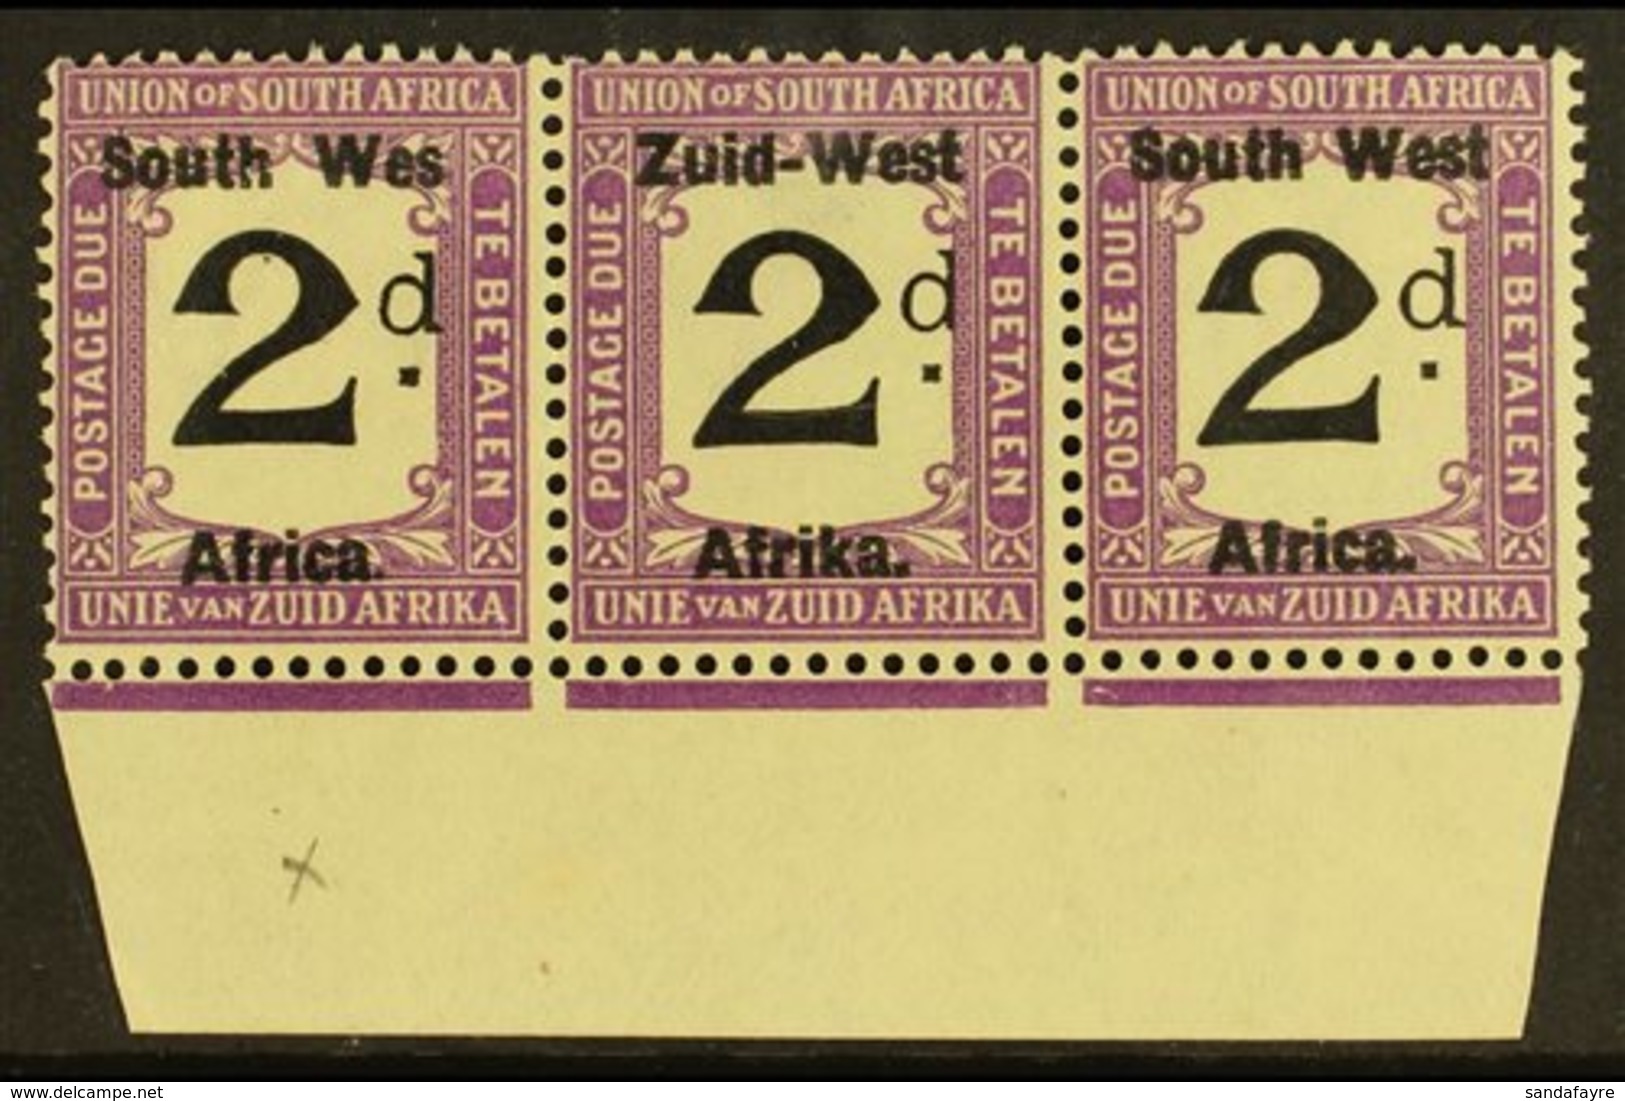 POSTAGE DUES 1923 2d Black And Violet, Marginal Strip Of 3, One Showing Variety "Wes For West", SG D3a, Very Fine NHM. F - South West Africa (1923-1990)